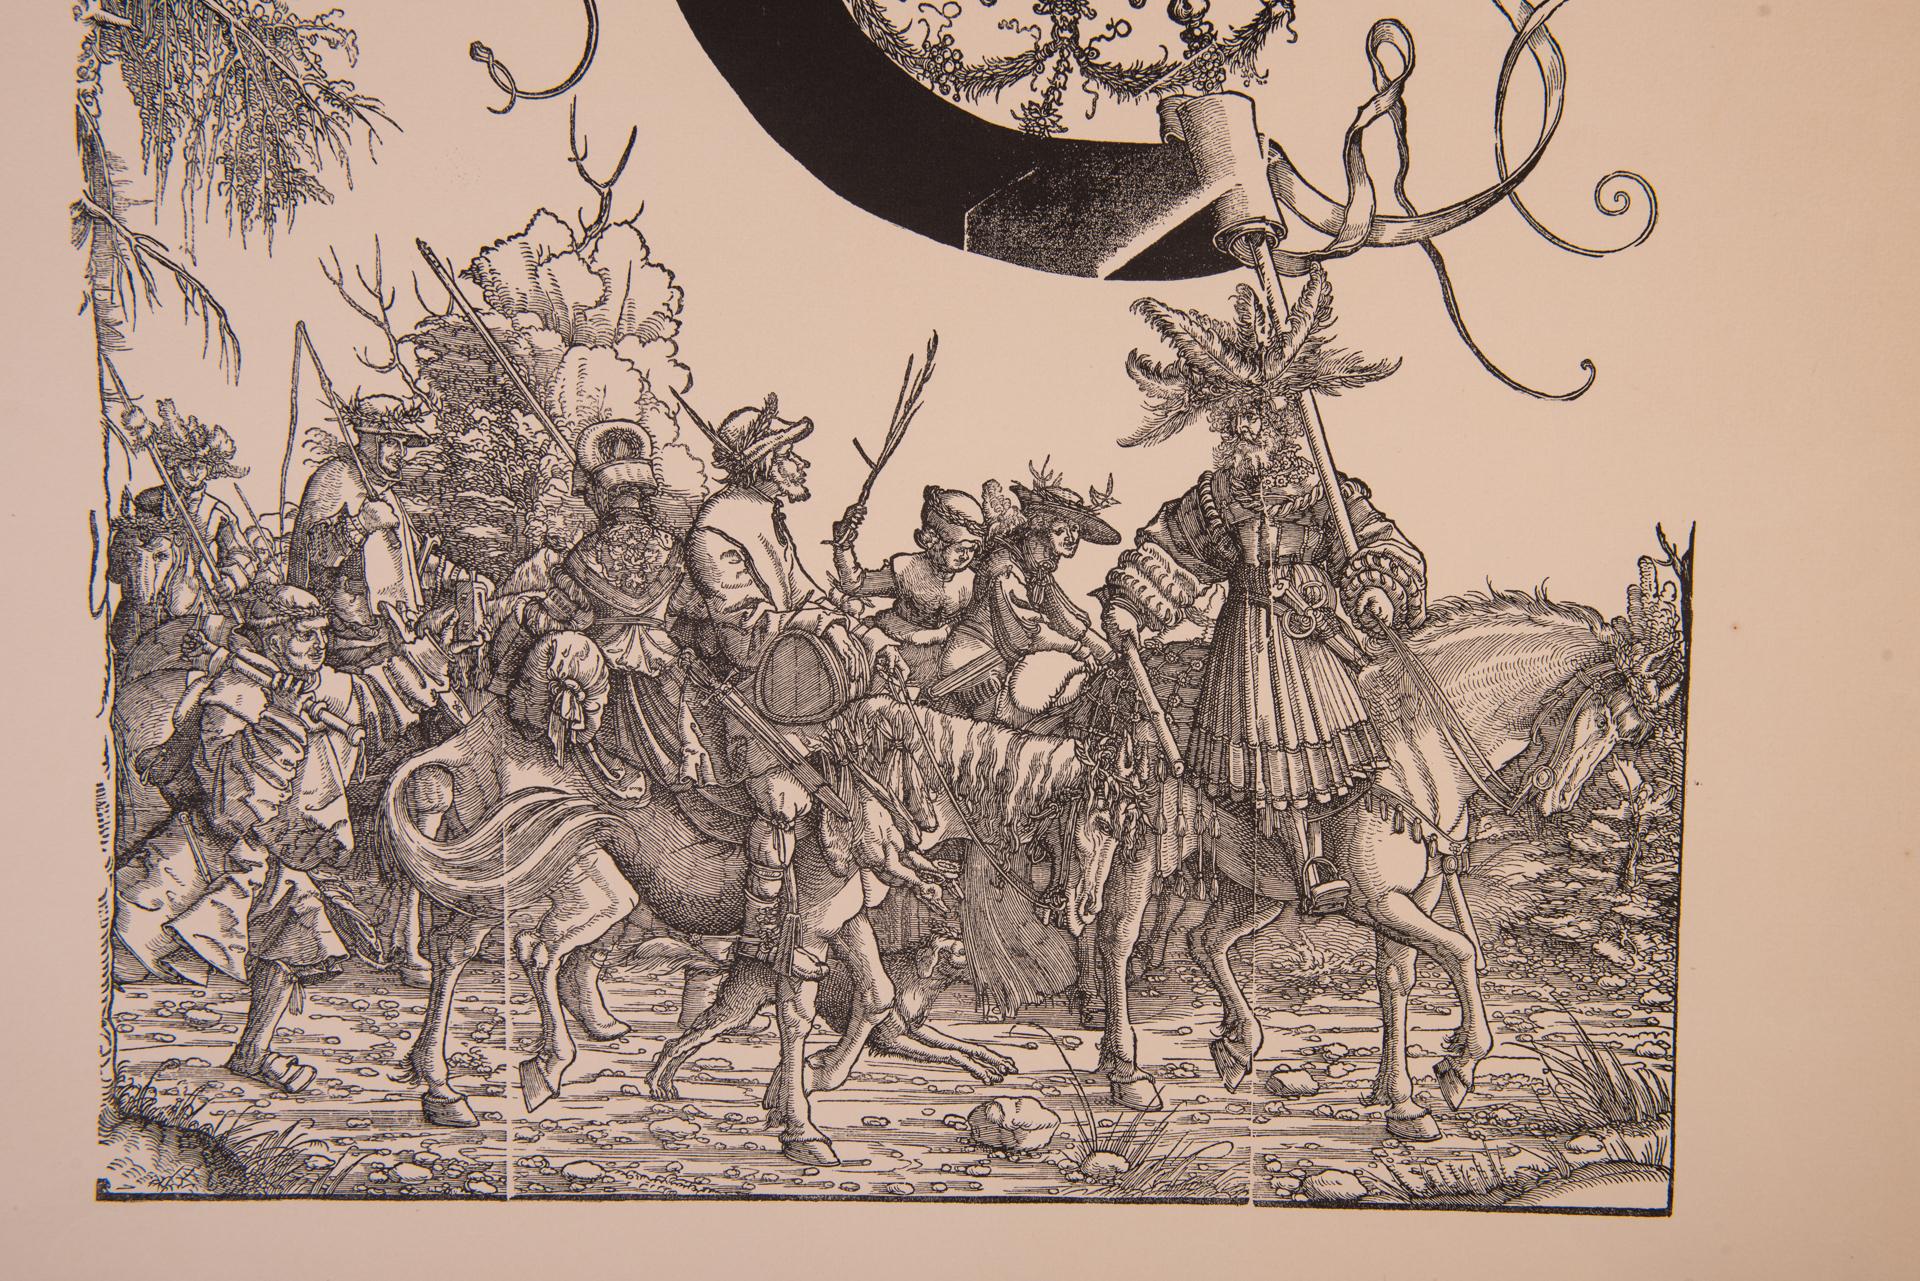 ST/728 /3 -  Engraving of Maximilian I° - Procession (noy better specified) - from the original engravings of the 16th and 17th centuries by Albrecht Altdorfer - Germany  (Landshut 1480- Regensburg 1538).
At an international auction these engravings